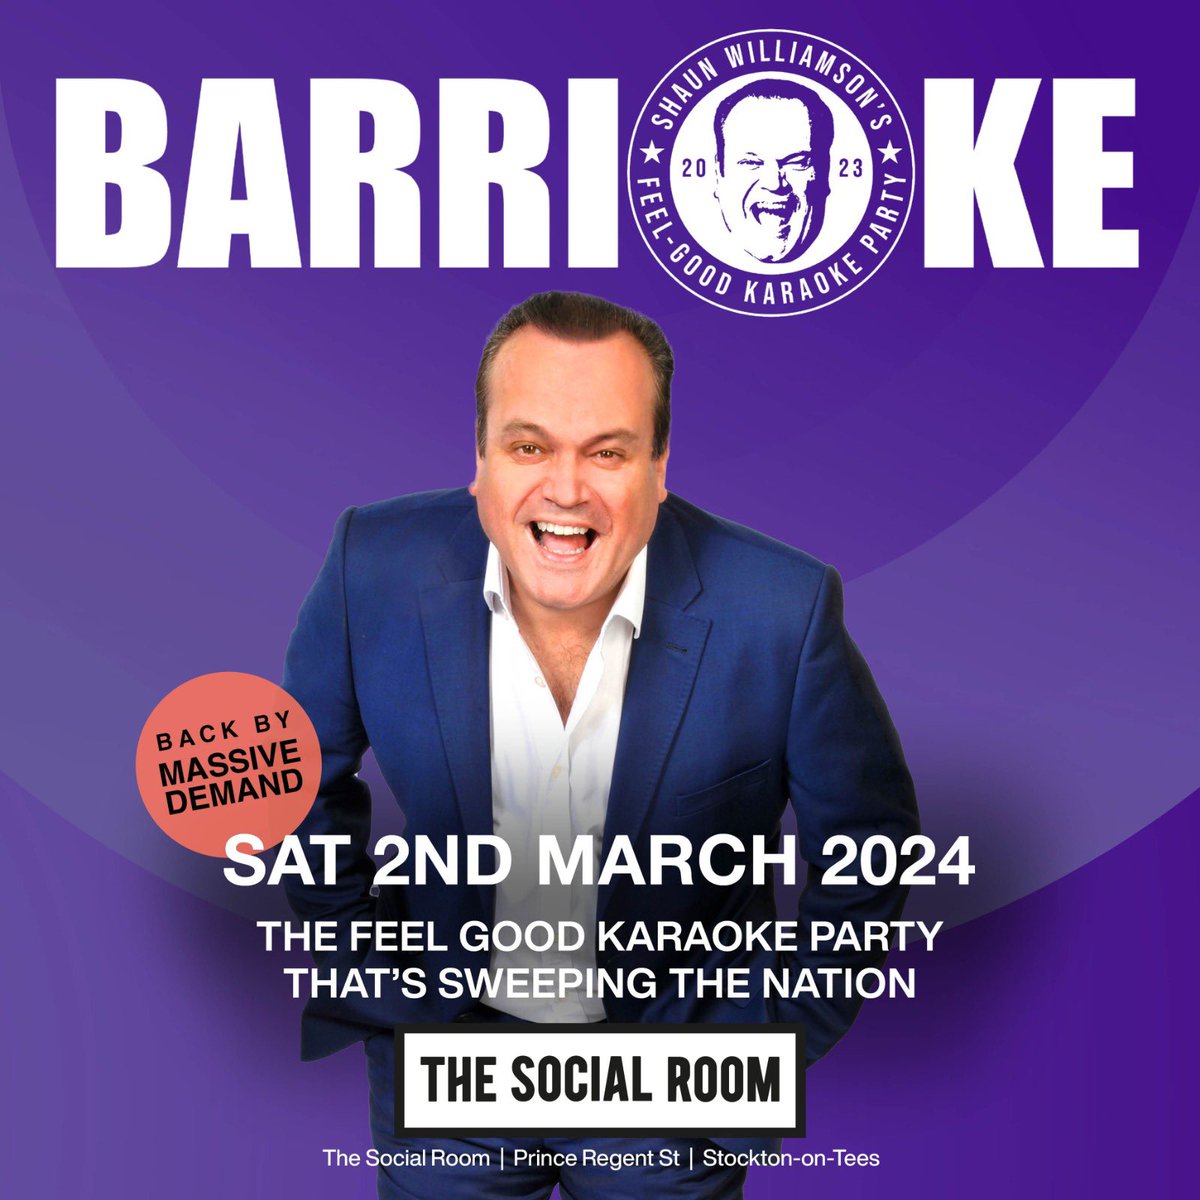 BACK BY DEMAND 🚨 Shaun Williamson hosts @Barrioke1 with his usual trademark warmth and teasing banter, accompanying participants on stage, creating a riotous, joyous moment that people will never forget. The ultimate Insta moment! fatso.ma/XYdH